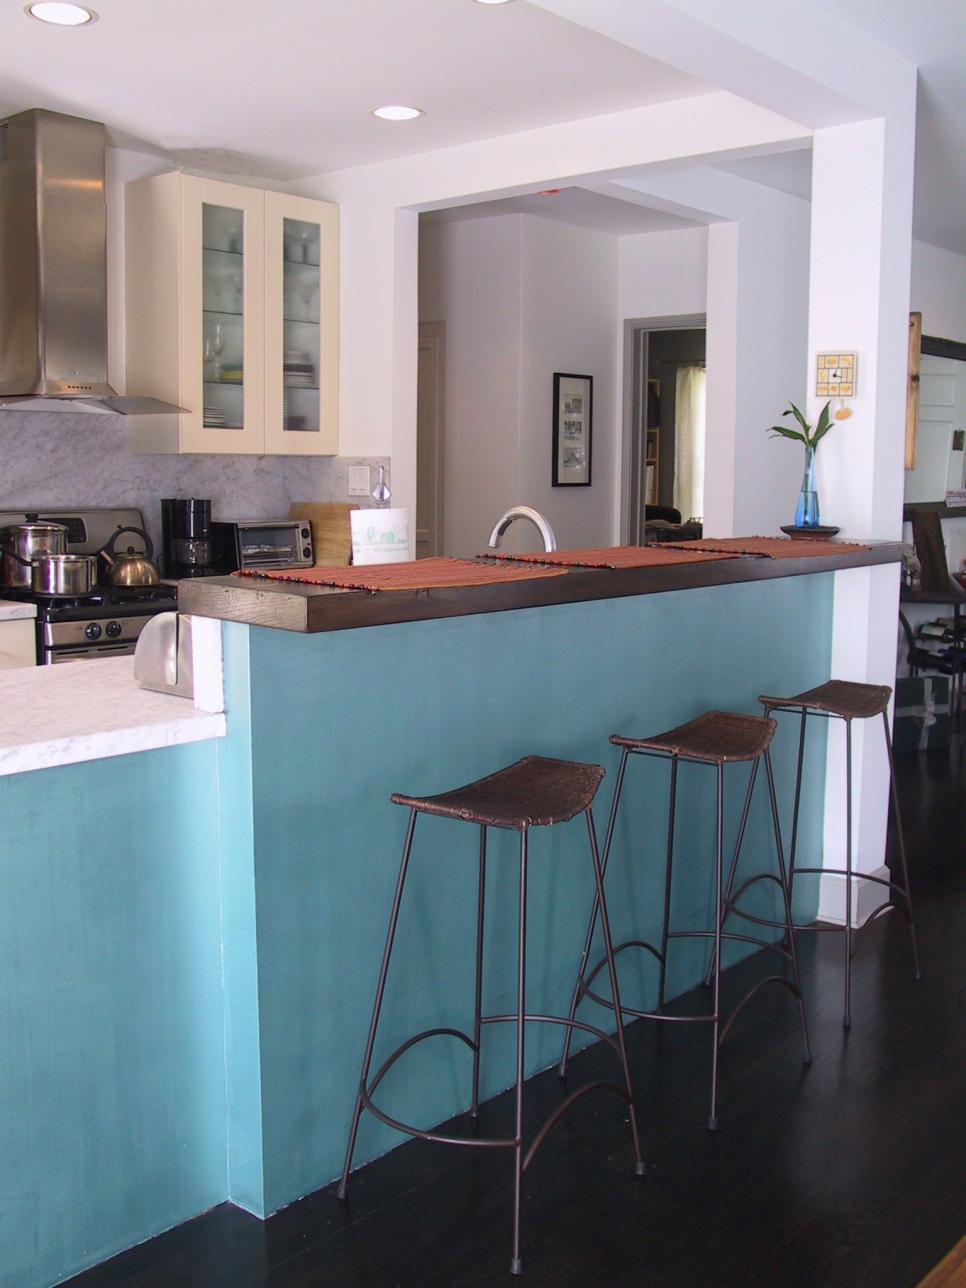 Small Open-Layout Kitchen With Sky-Blue Bar and Barstools